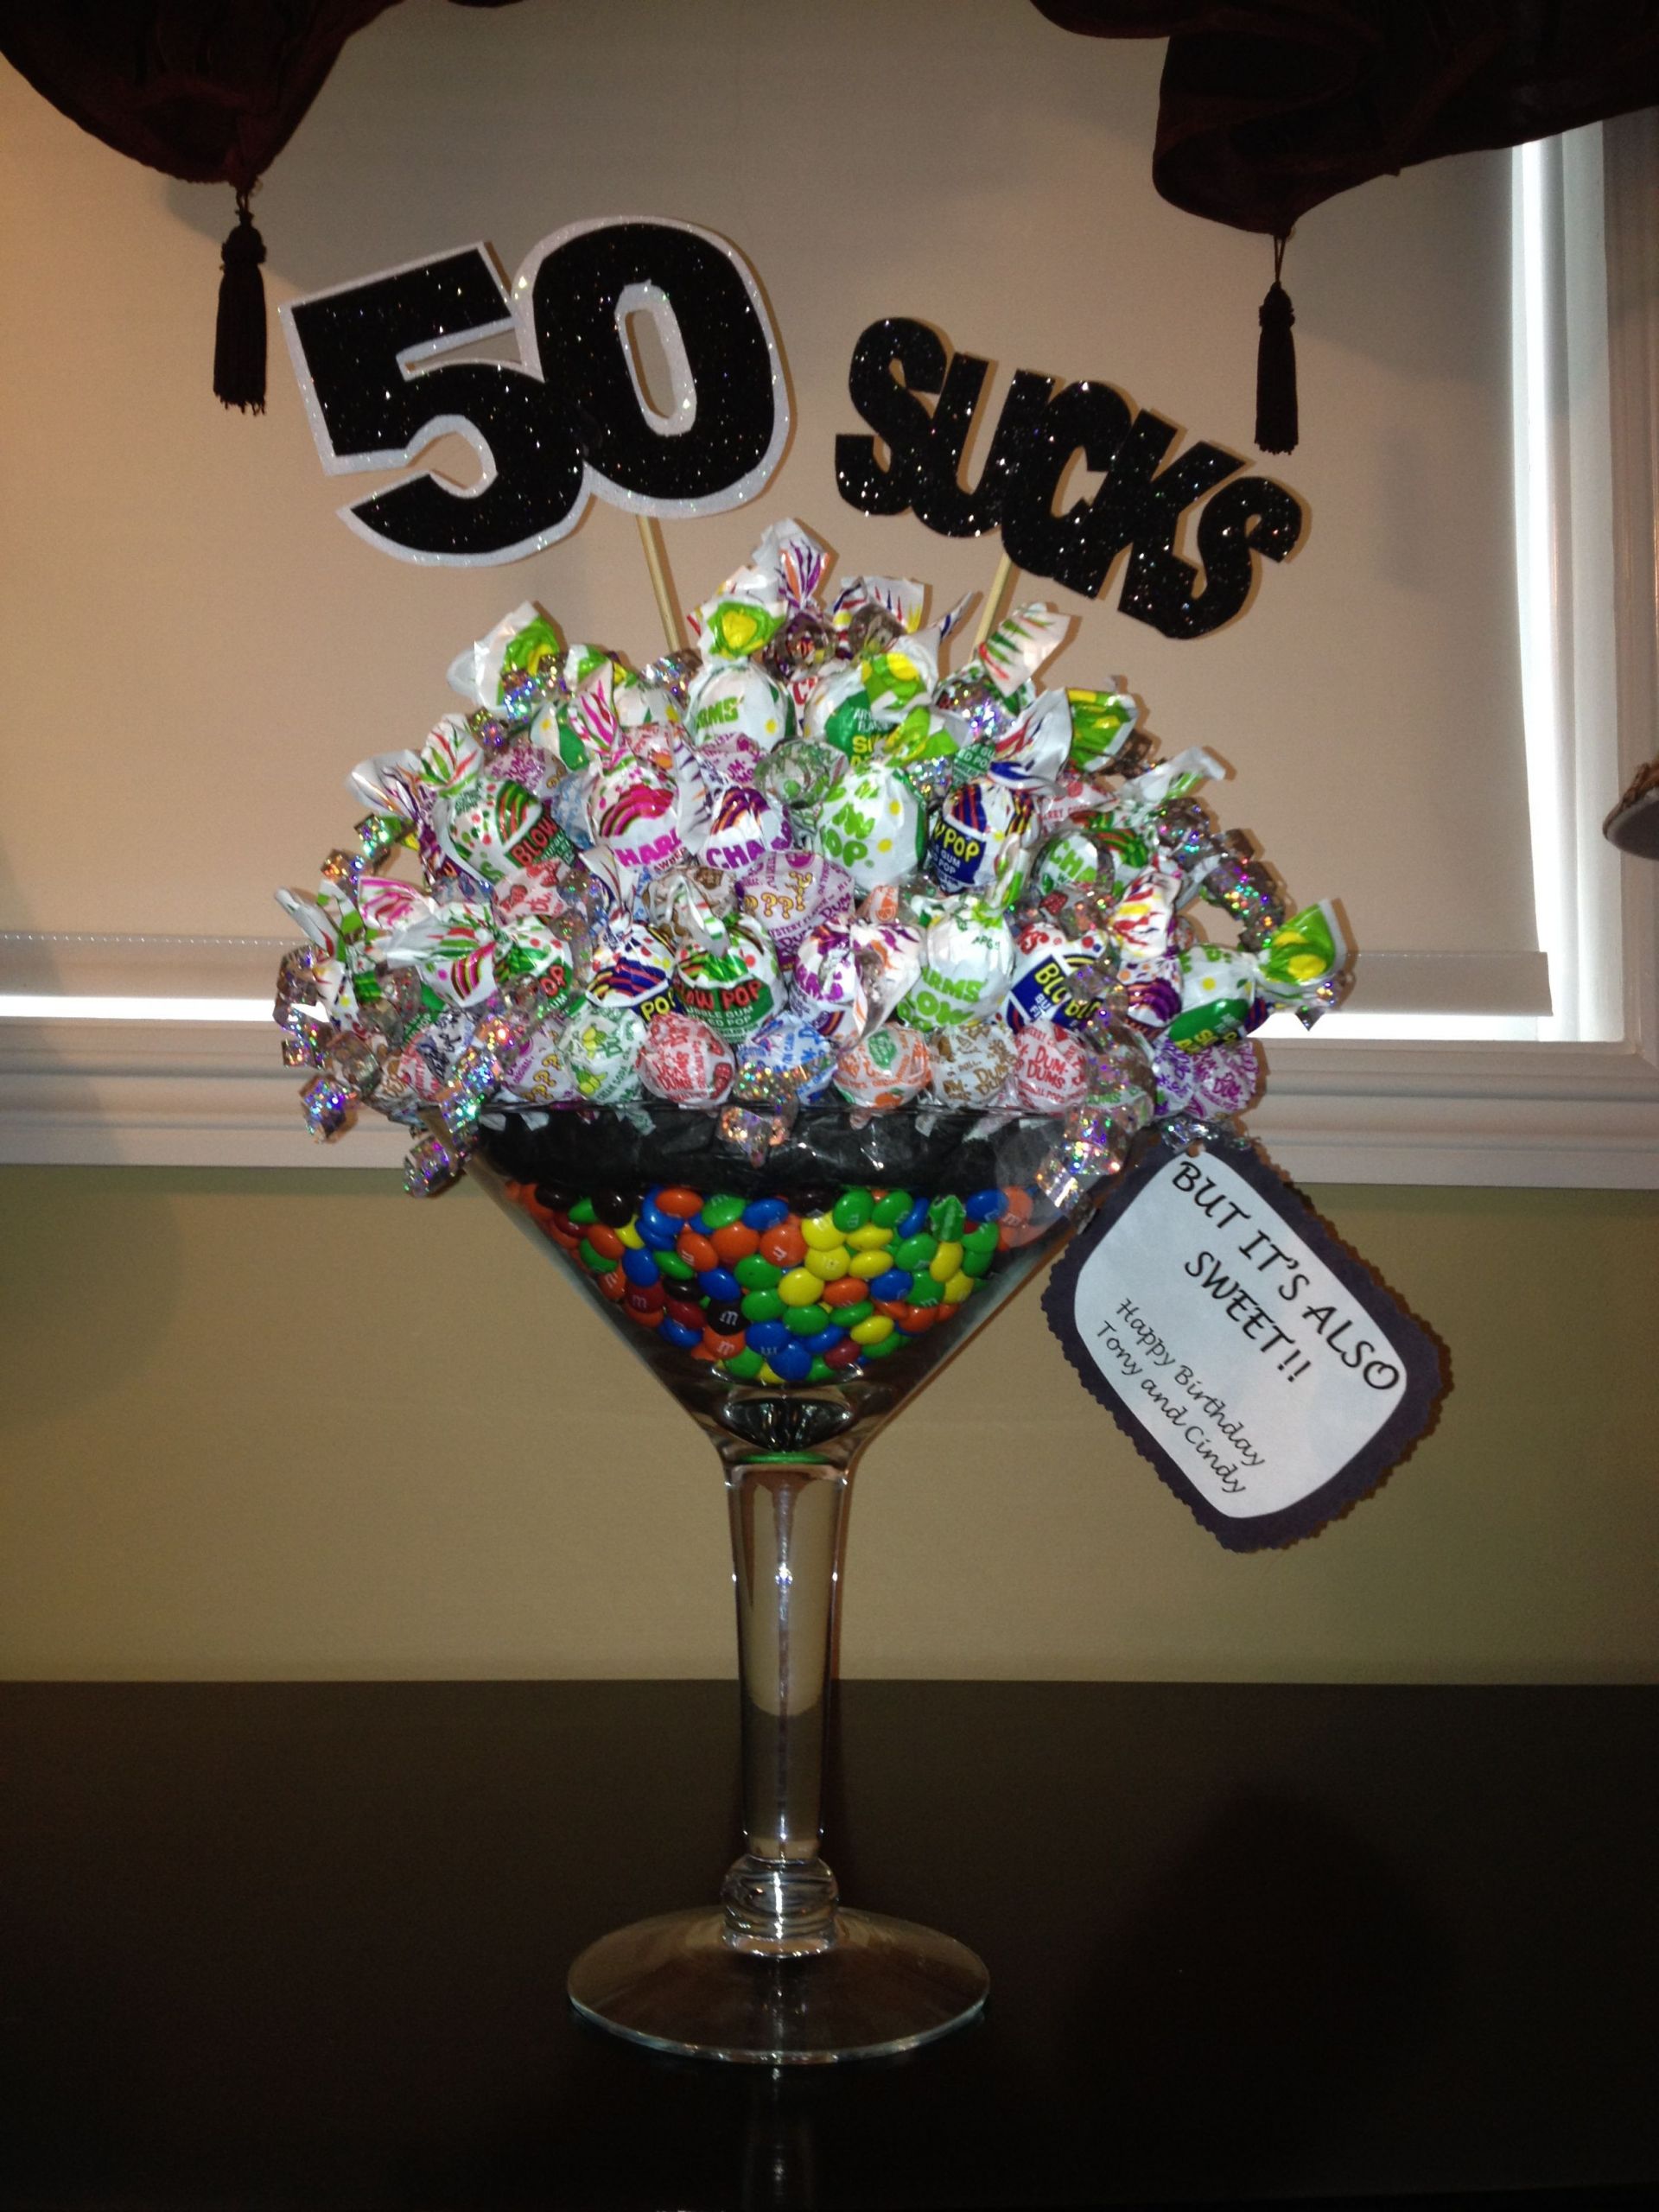 50th Birthday Decoration Ideas
 Pin on 50th Birthday Party Favors and Ideas